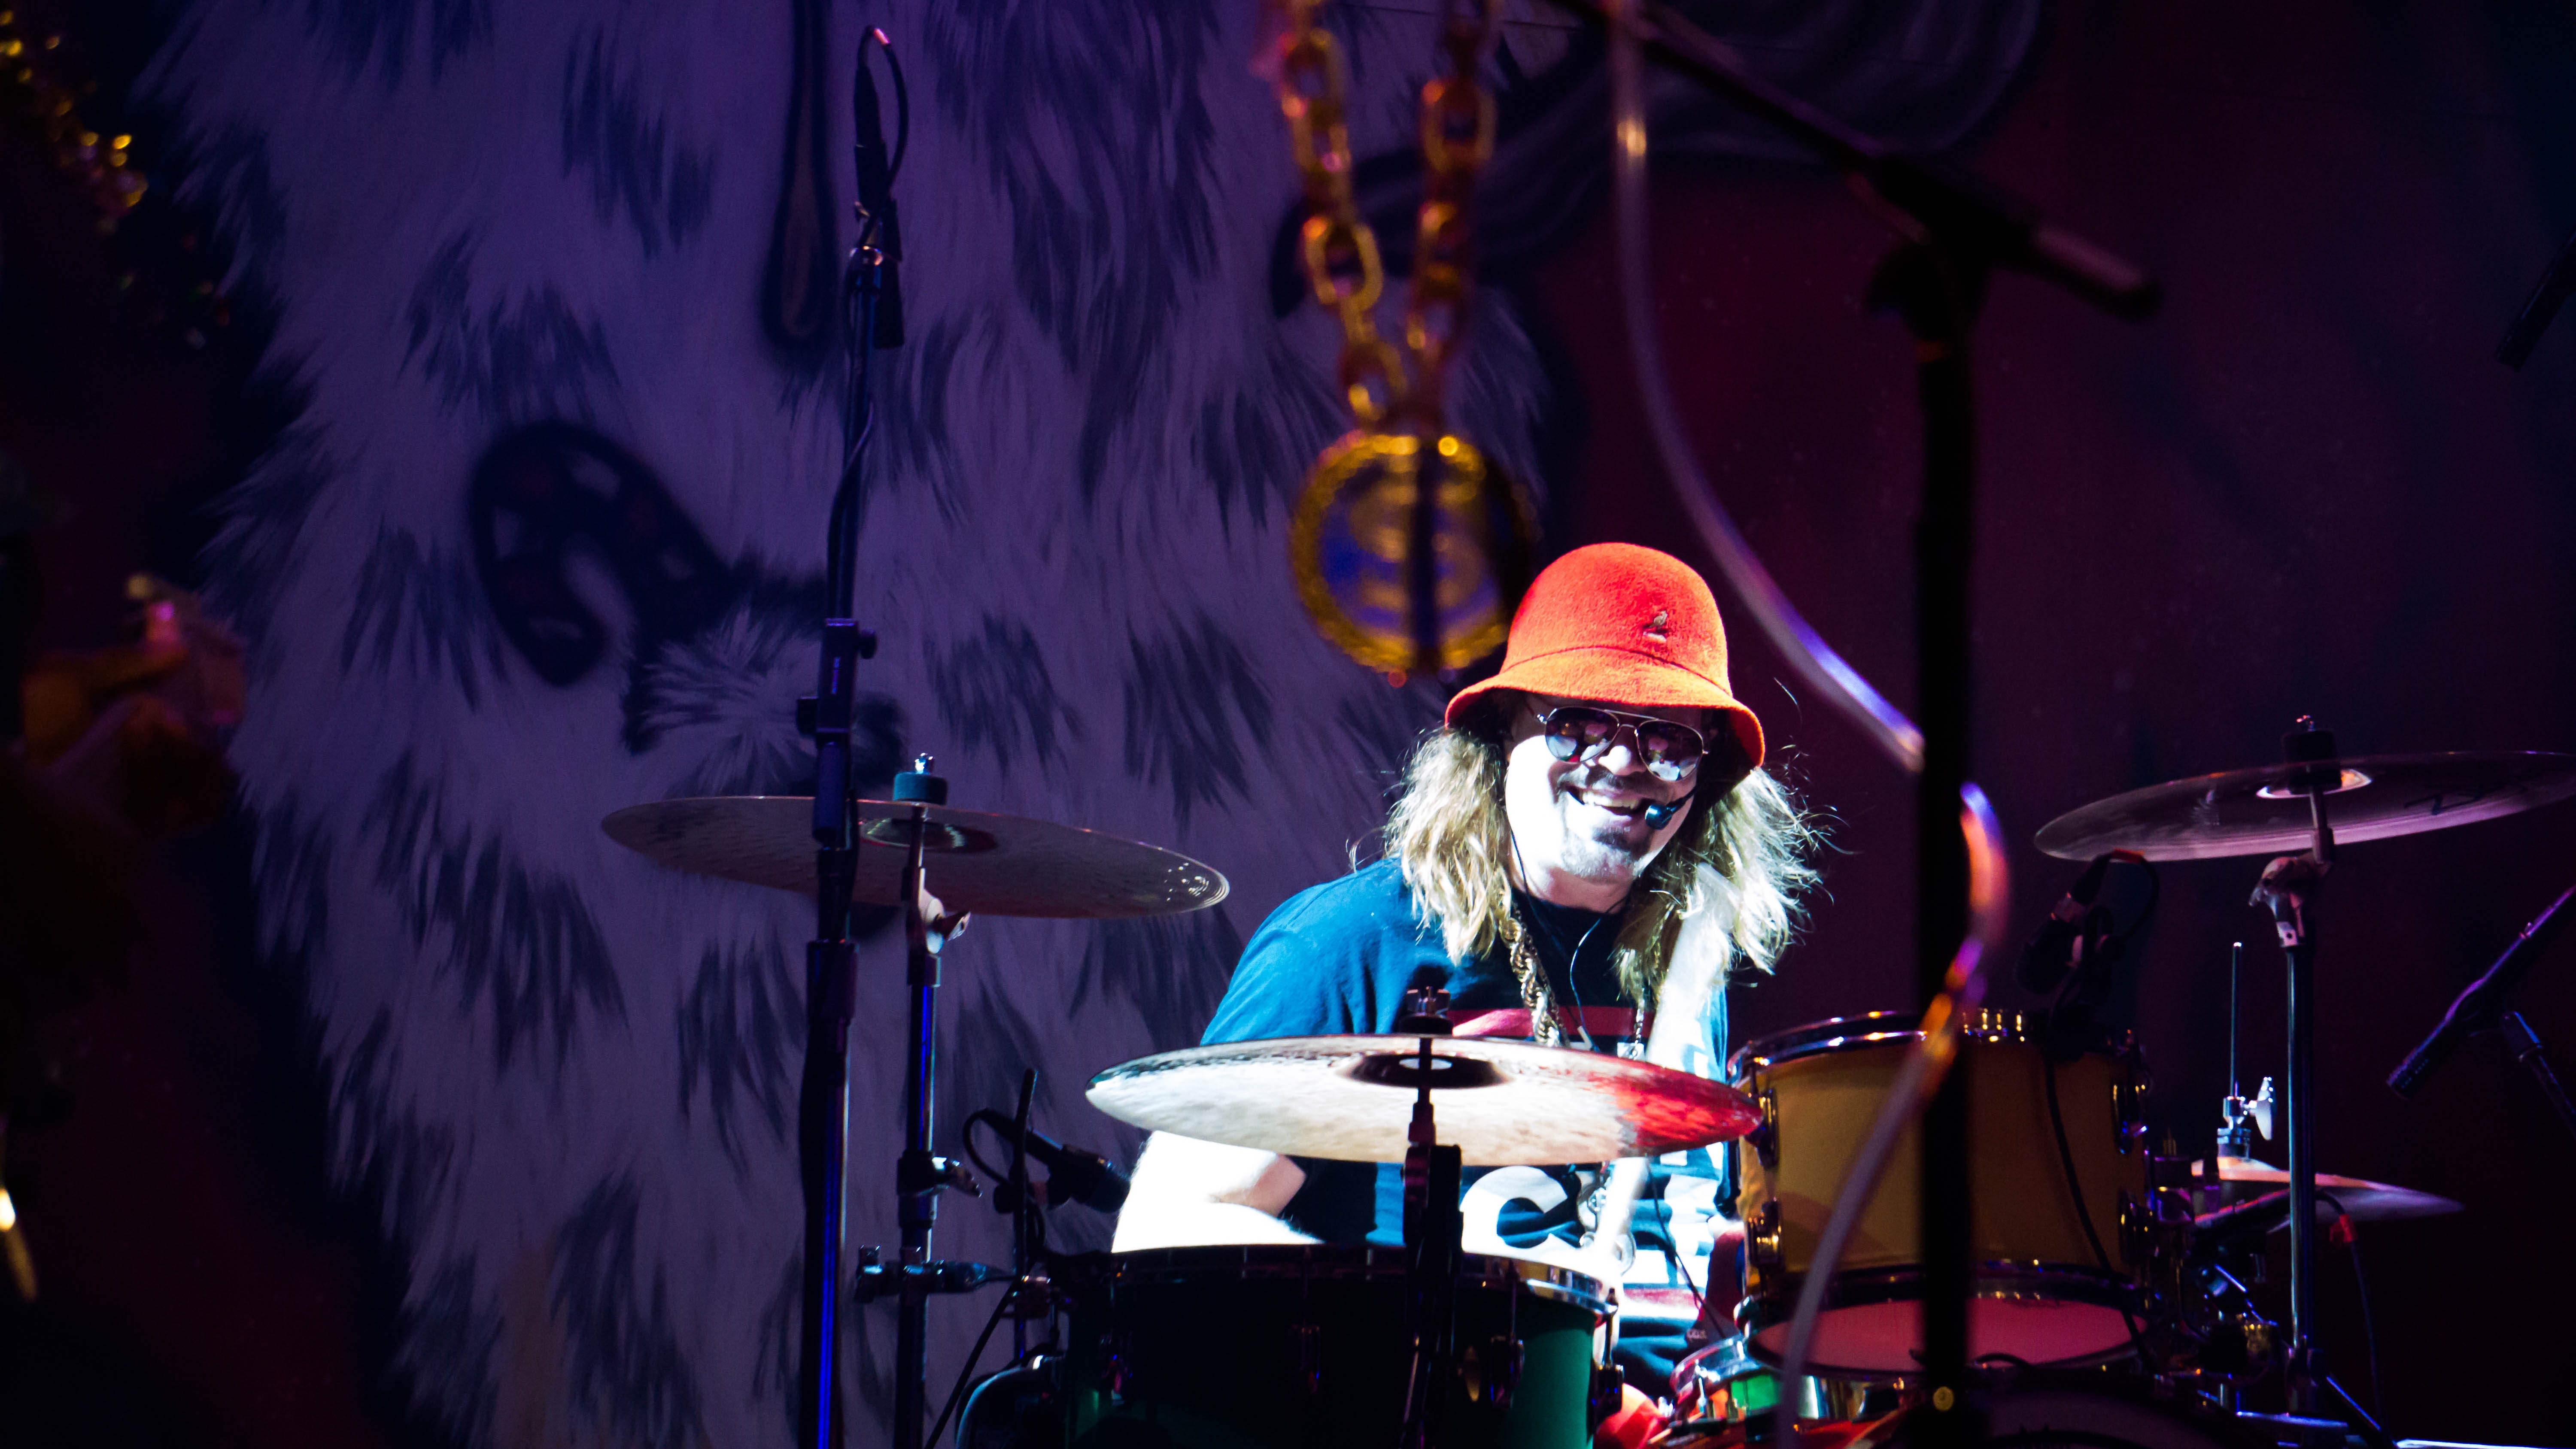 man playing drum on the stage]